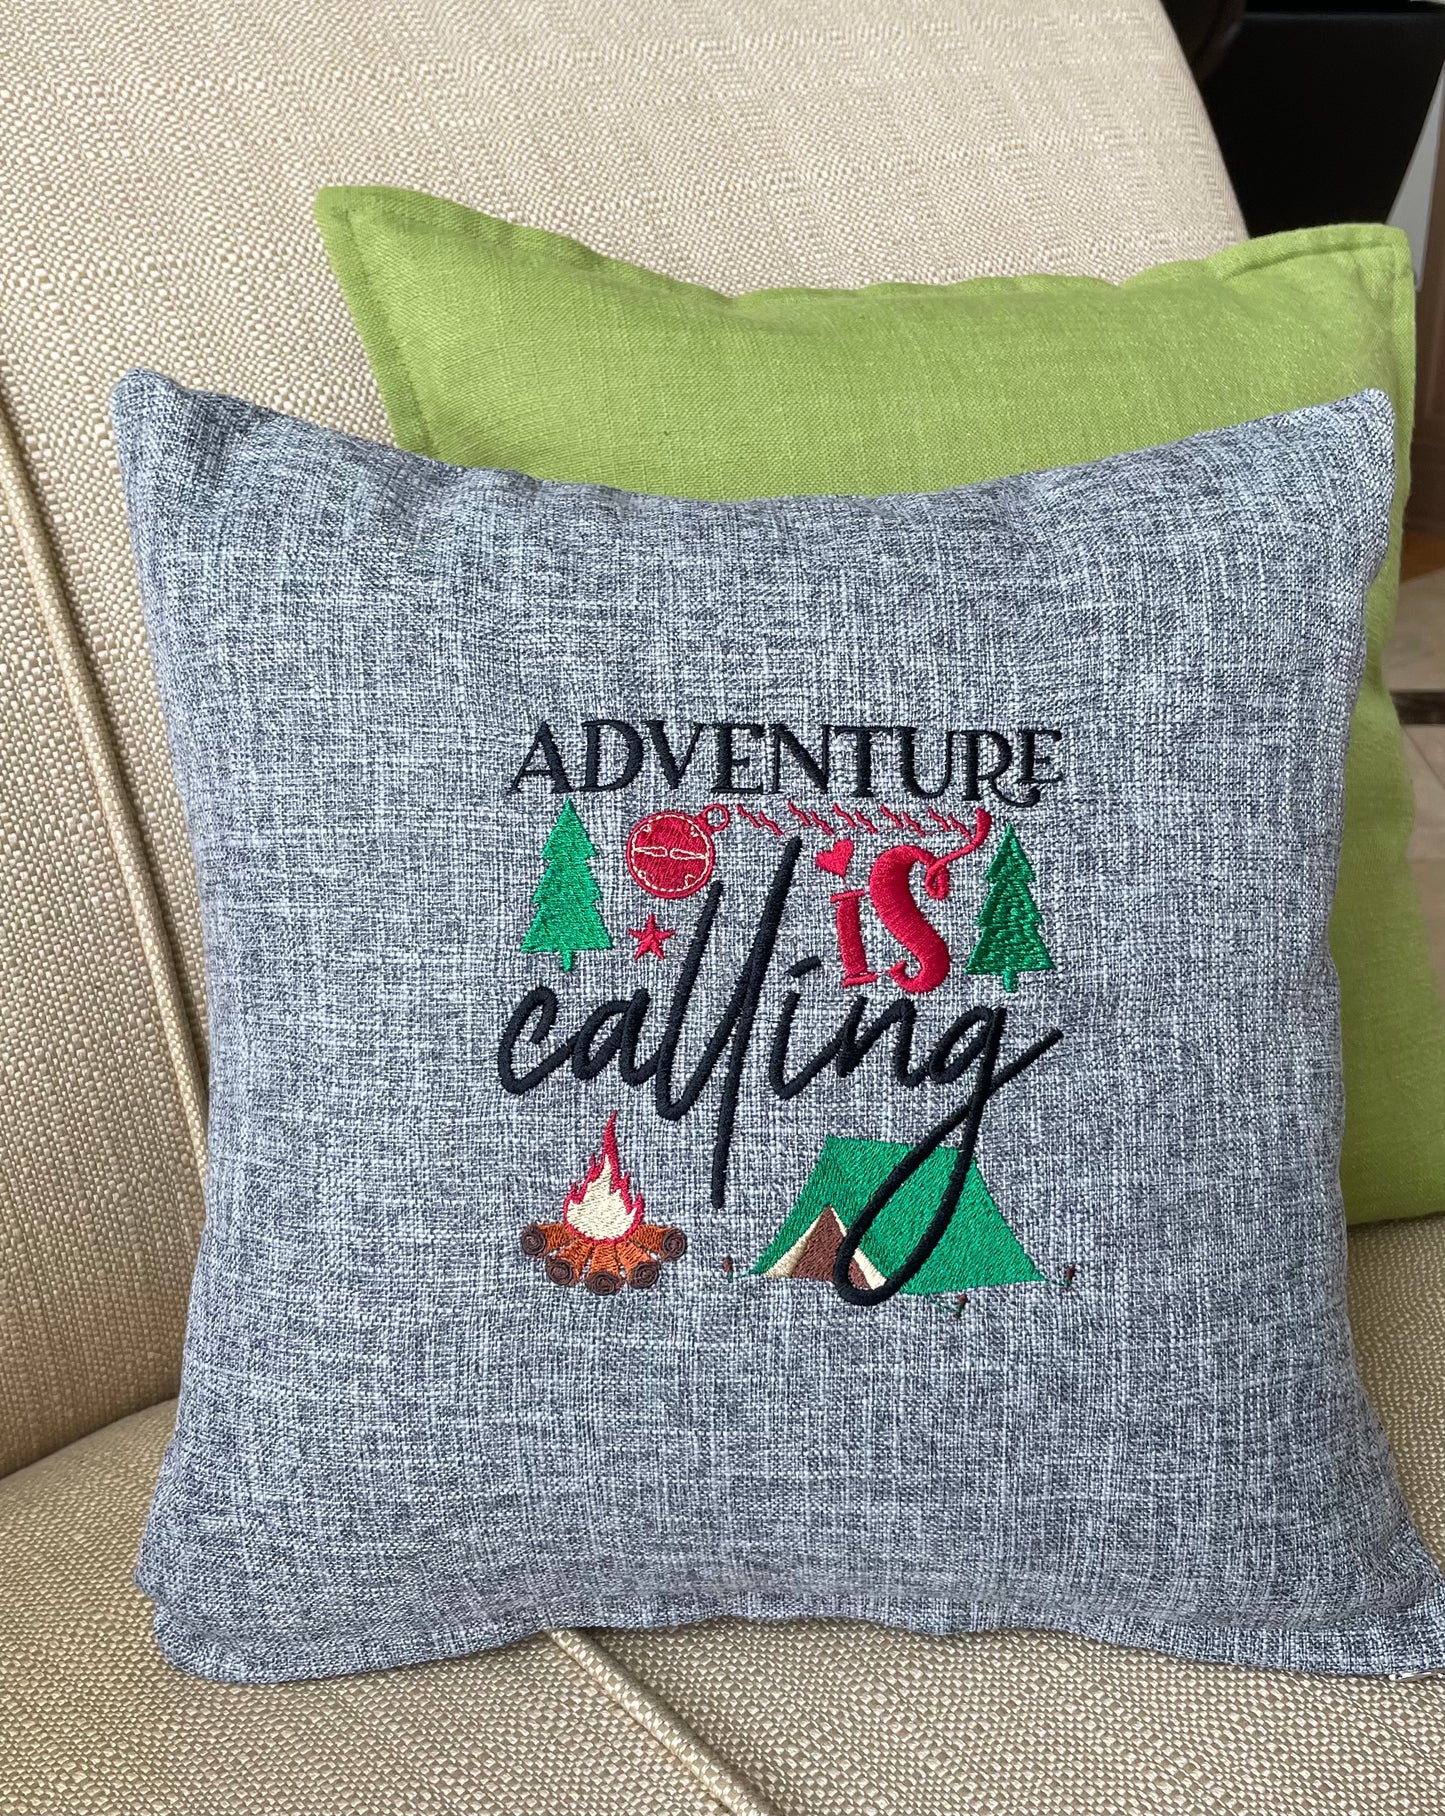 Adventure is Calling Throw Pillow Cover 16 x 16 inch Cotton